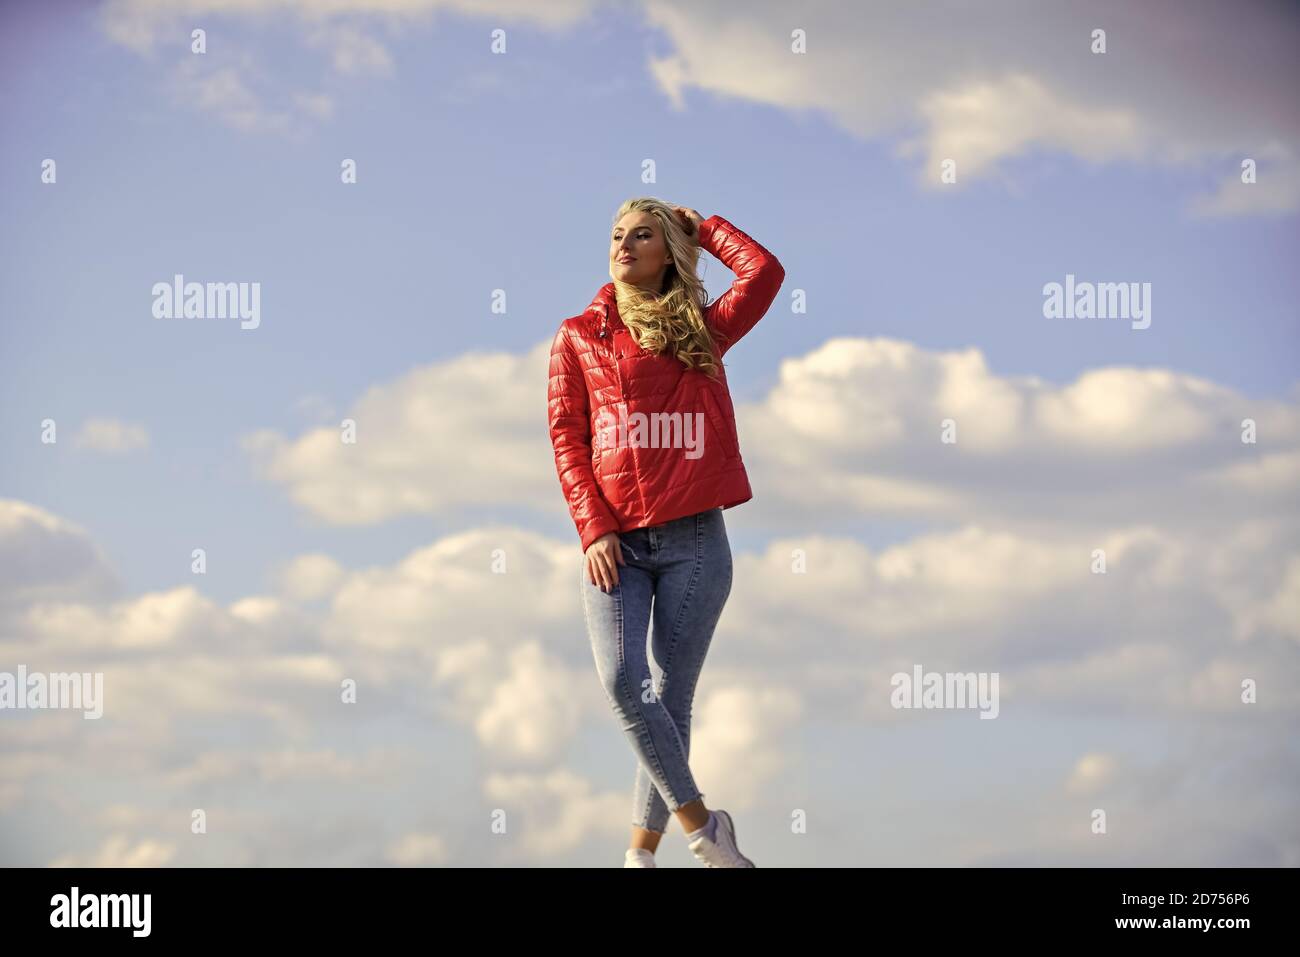 Young and beautiful. woman in model pose outdoors. feel free. woman enjoying weather outdoors. Freedom and expectation. Beauty and fashion, look. concept of loneliness. woman on blue sky background. Stock Photo